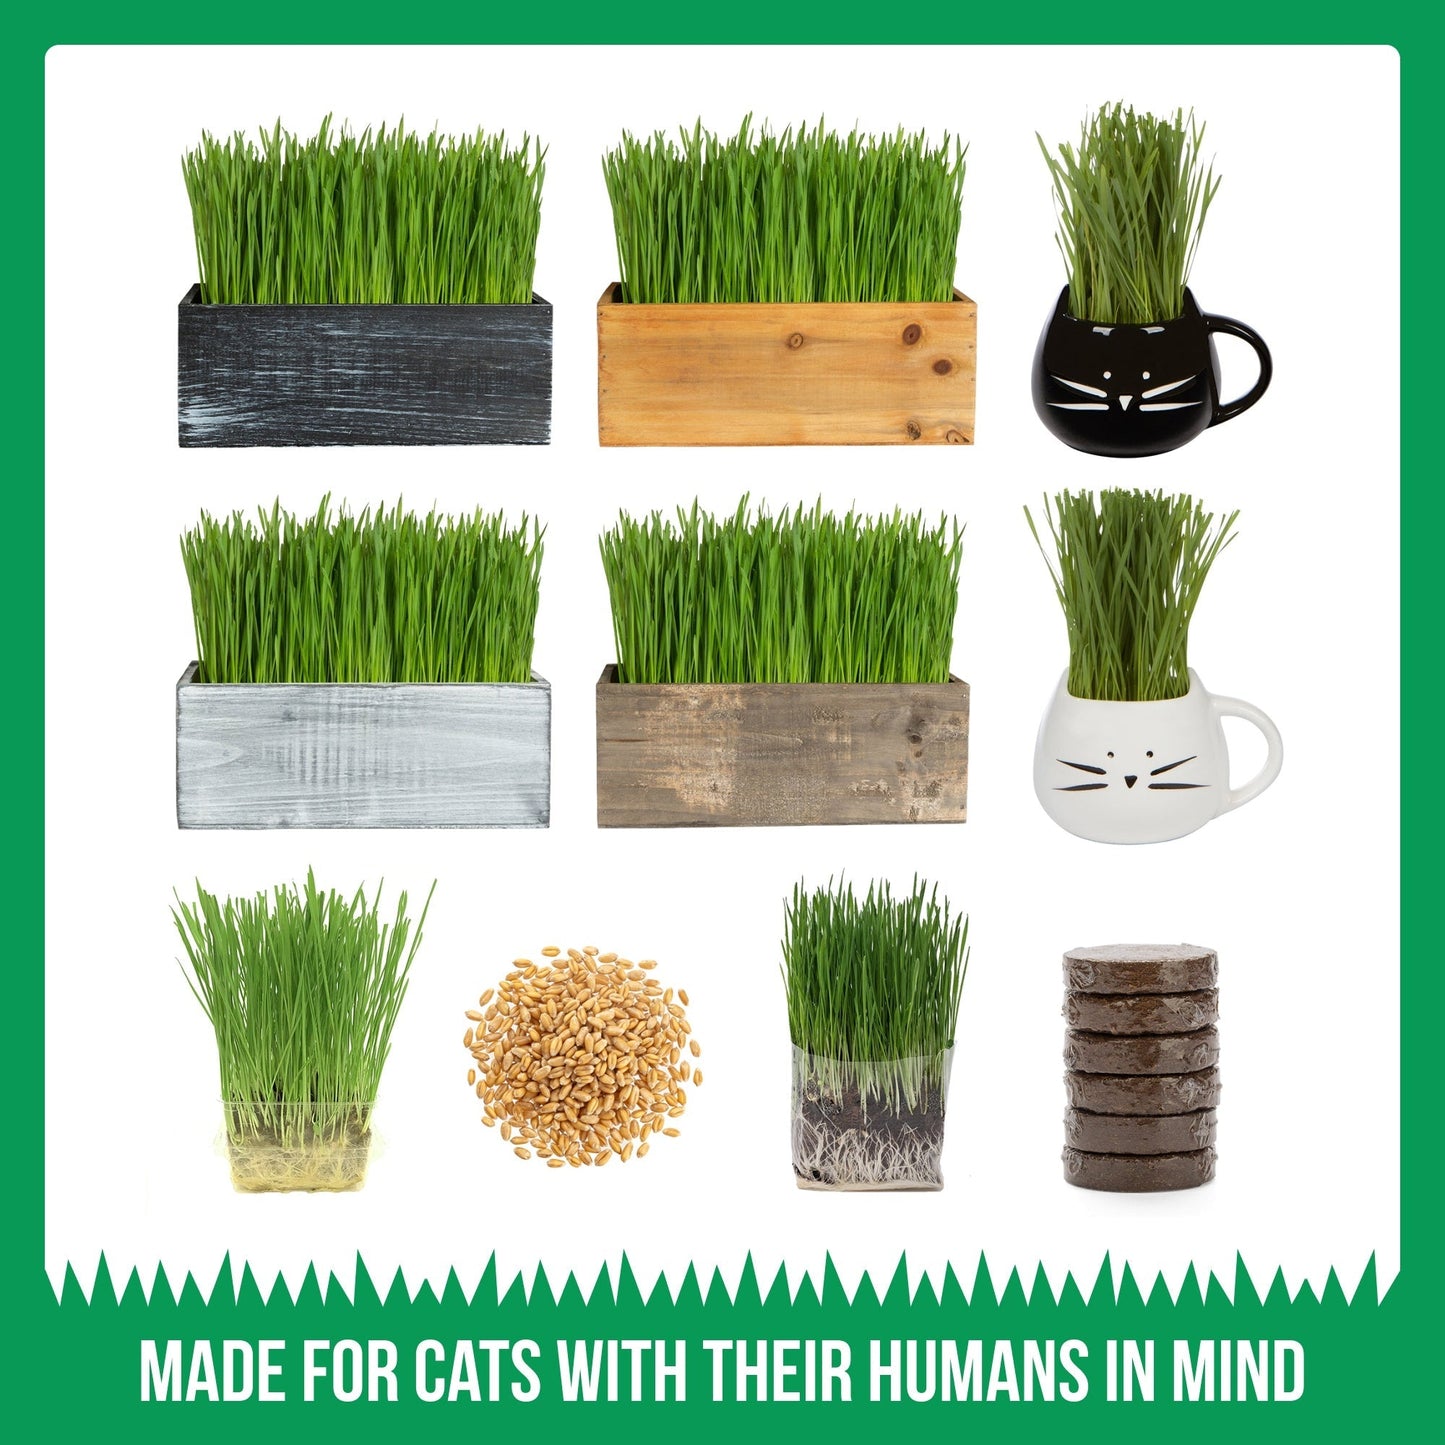 Cat Grass Seeds and Planters - White Rustic Wood Planter